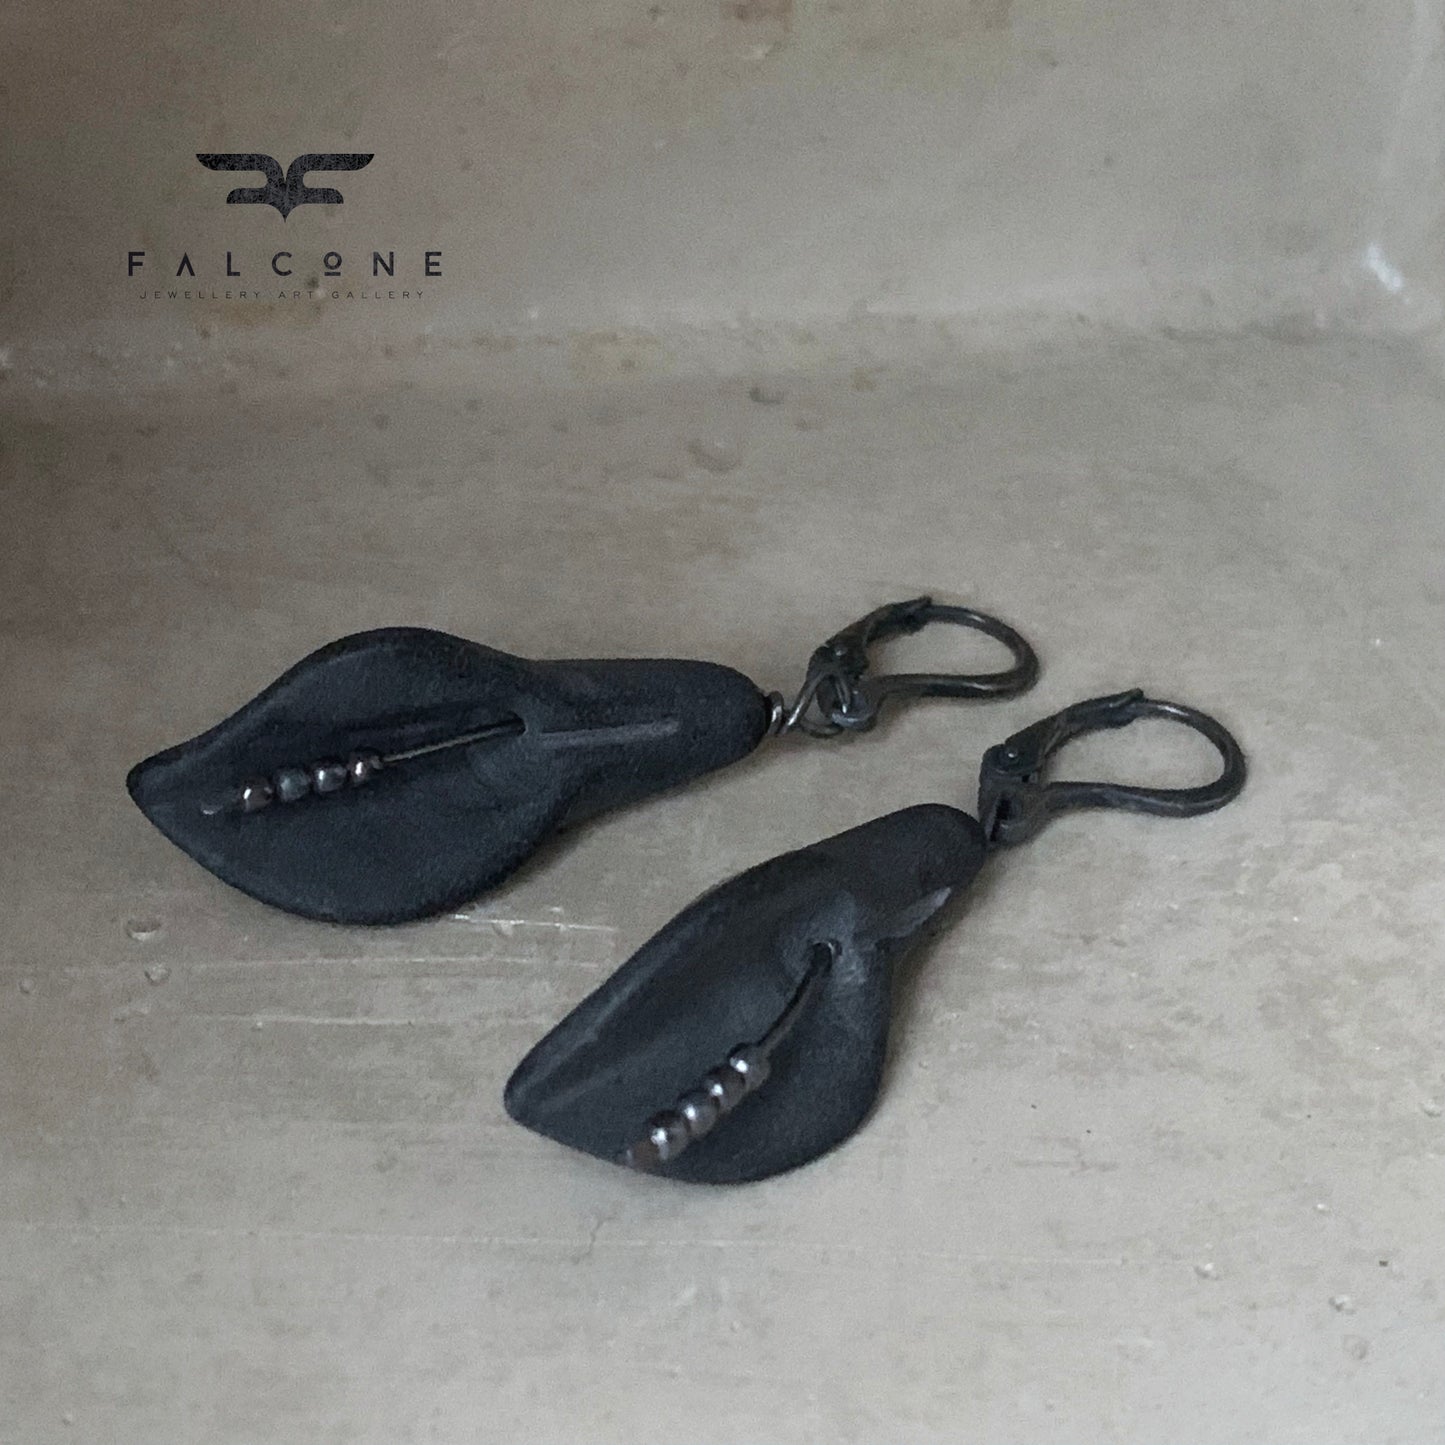 Silver earrings with carved Black Stone 'Black Callas'